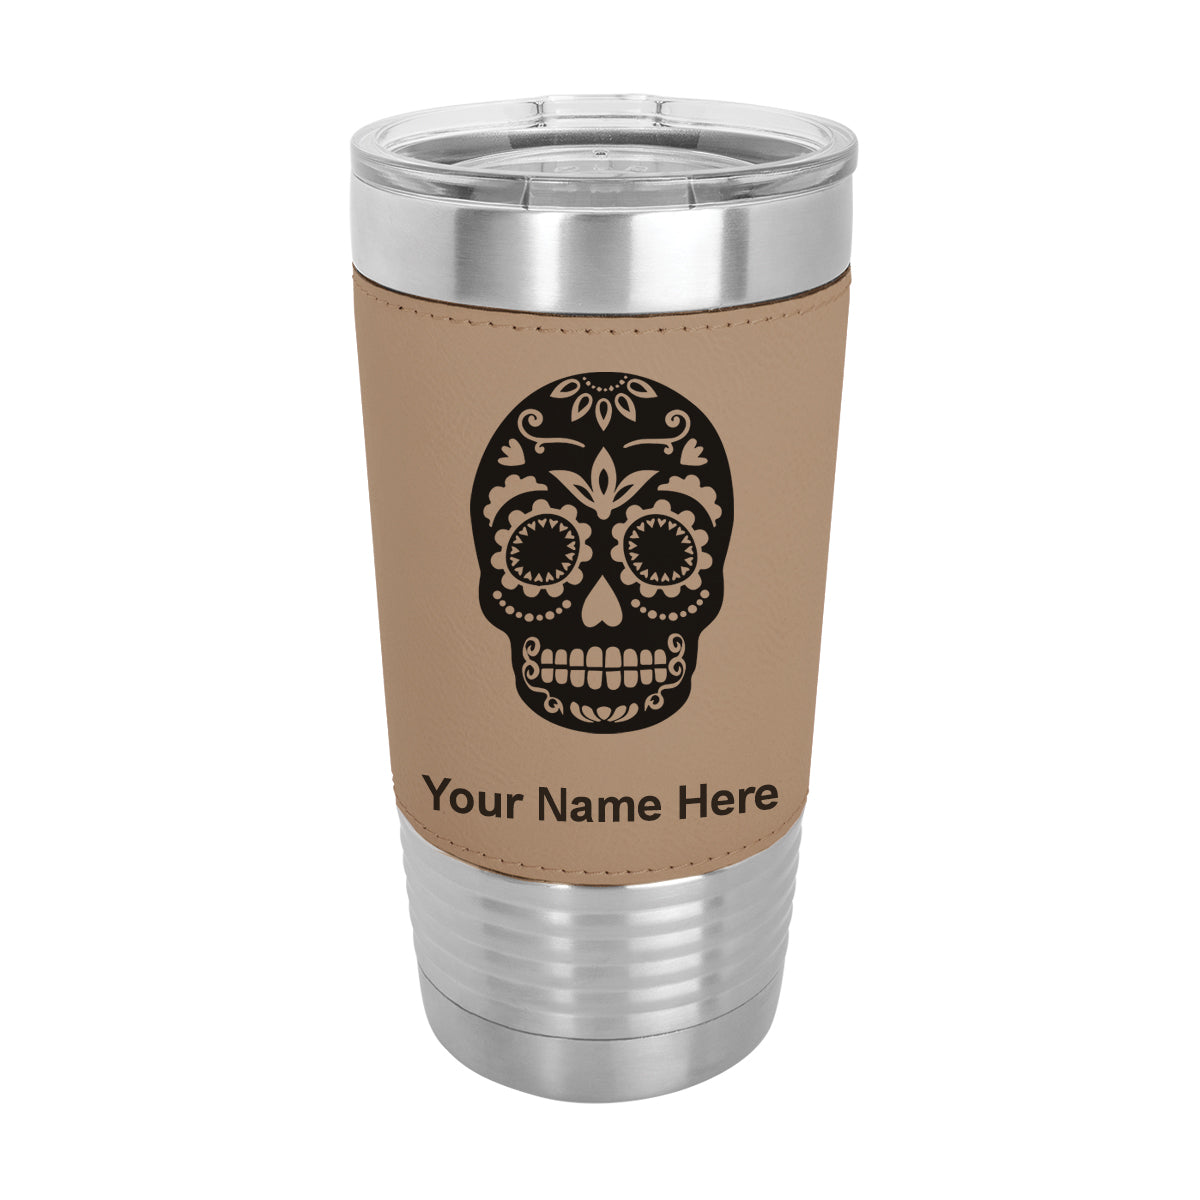 20oz Faux Leather Tumbler Mug, Day of the Dead, Personalized Engraving Included - LaserGram Custom Engraved Gifts